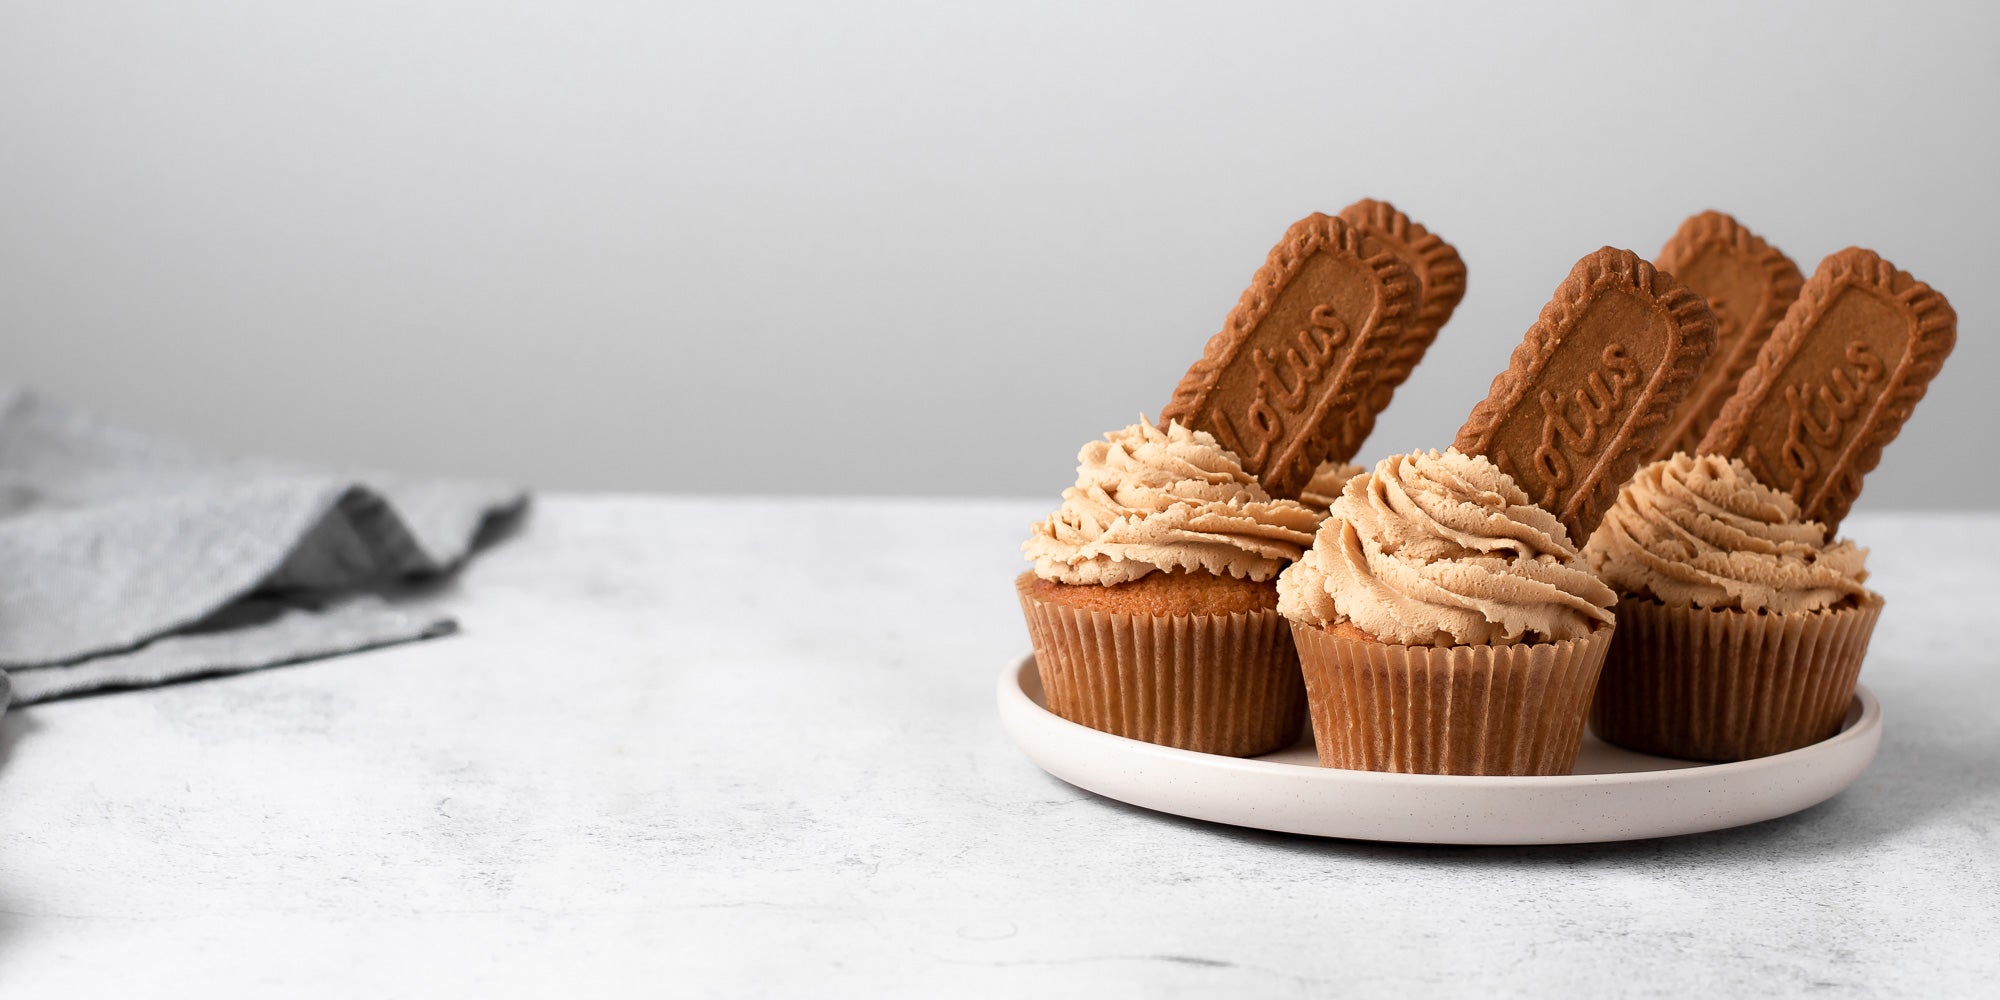 biscoff cupcakes on a plate